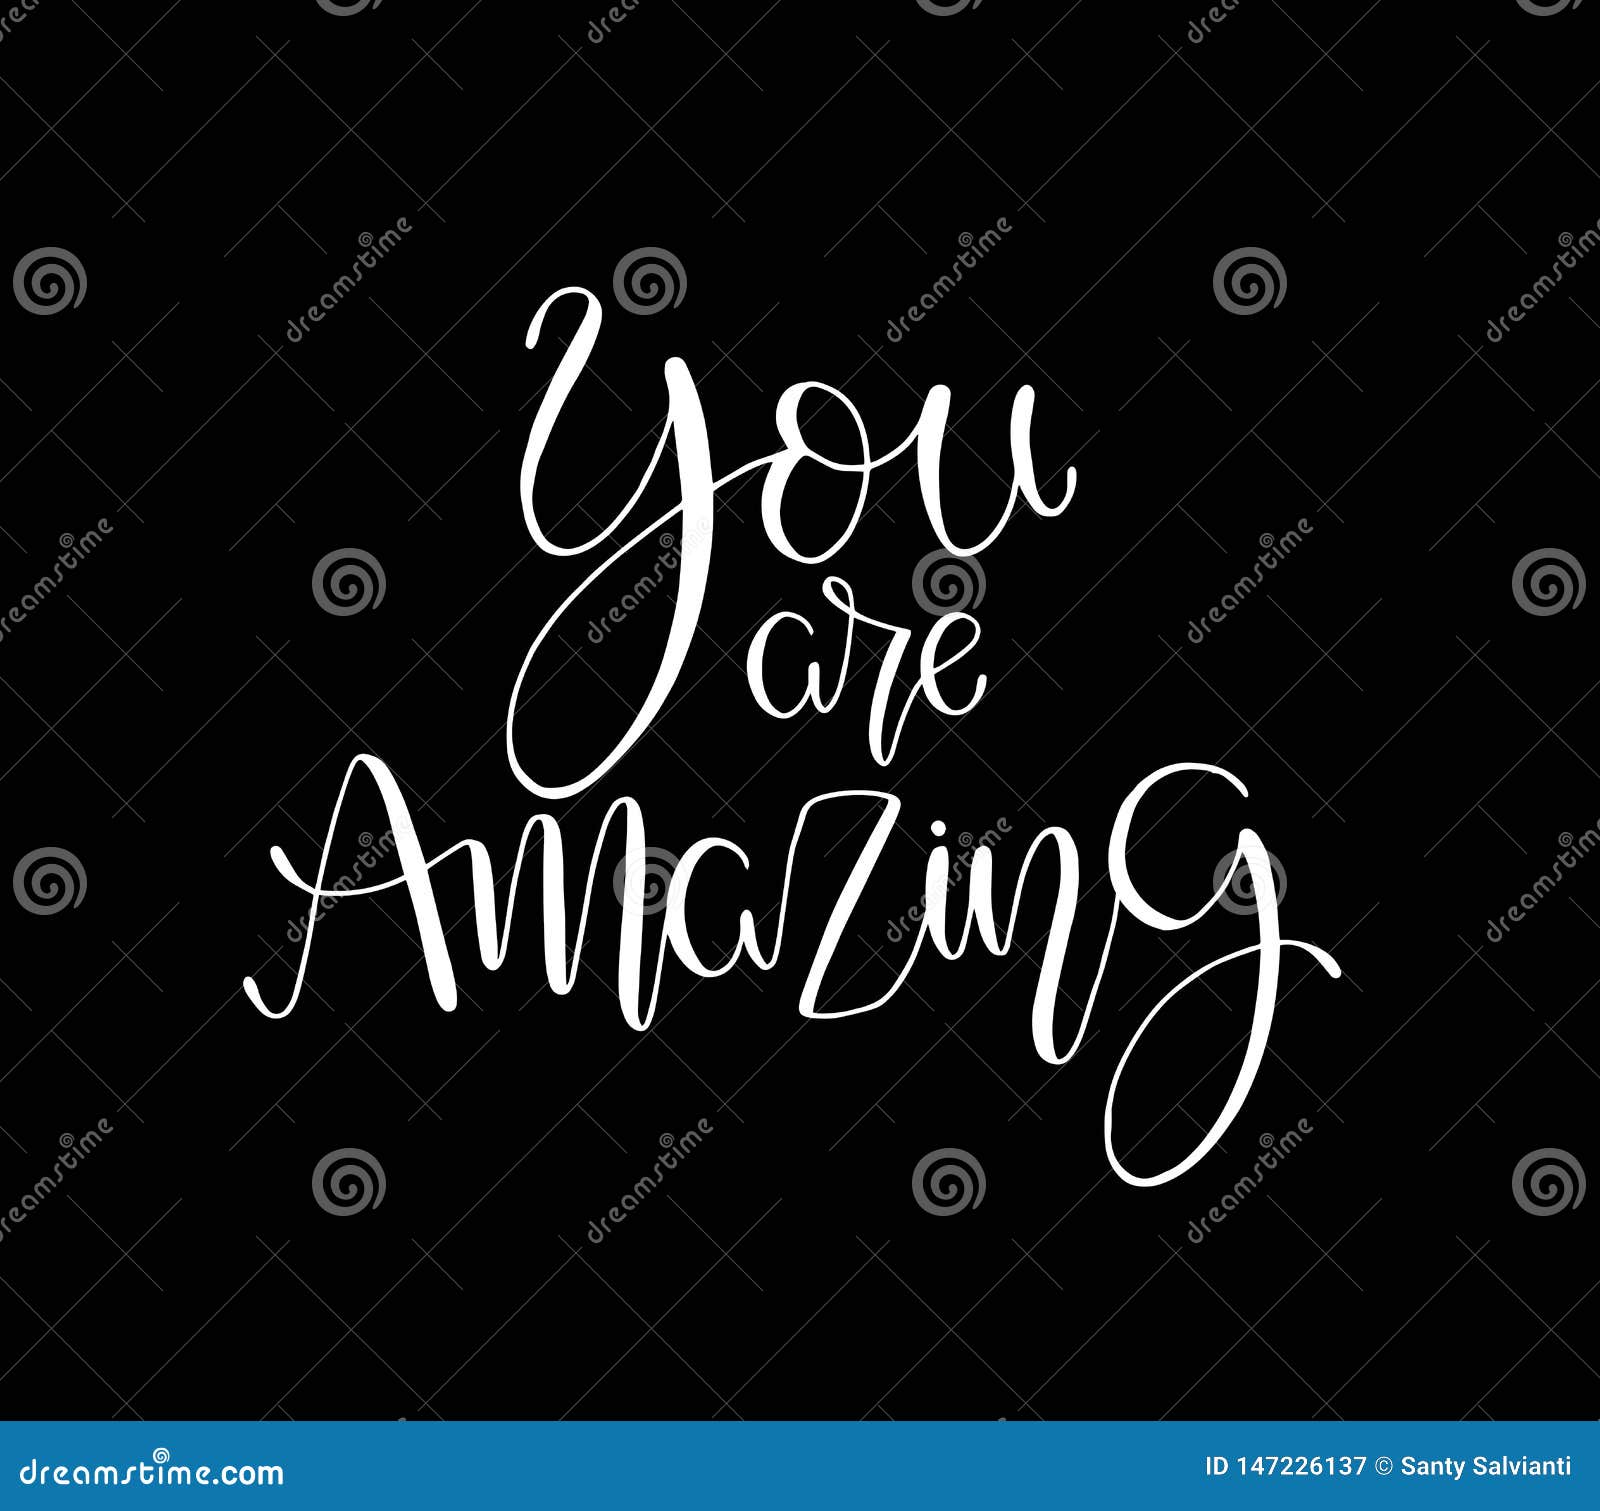 You are amazing. Positive quote handwritten with brush typography. Inspirational and motivational phrase. Hand lettering and calligraphy for designs: t-shirts, poster, greeting cards, etc